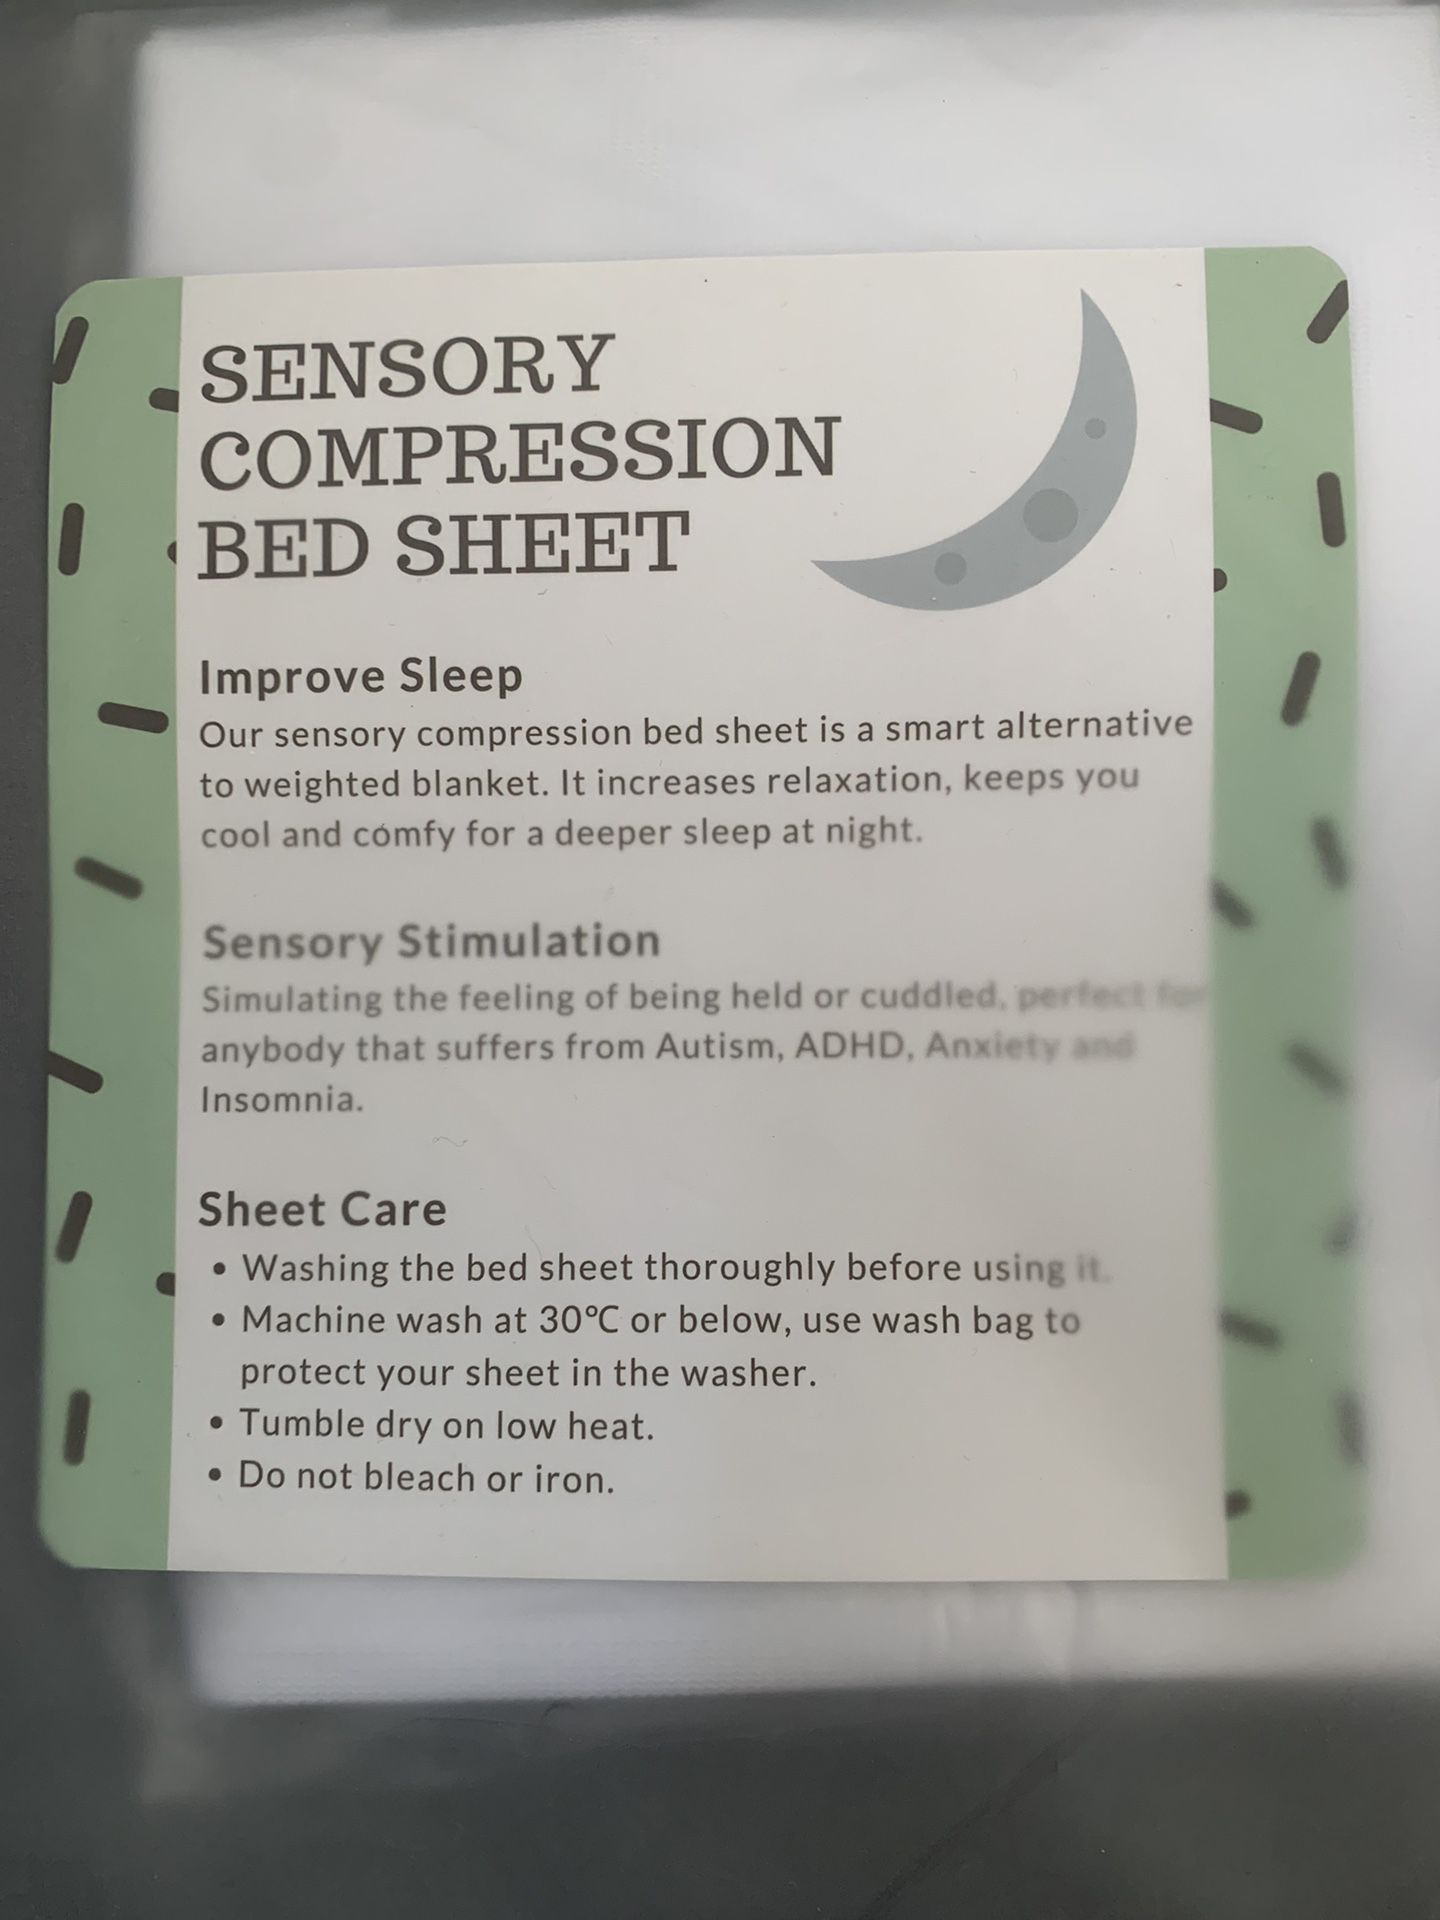 2 Sensory Compression Bed Sheet. Twin size